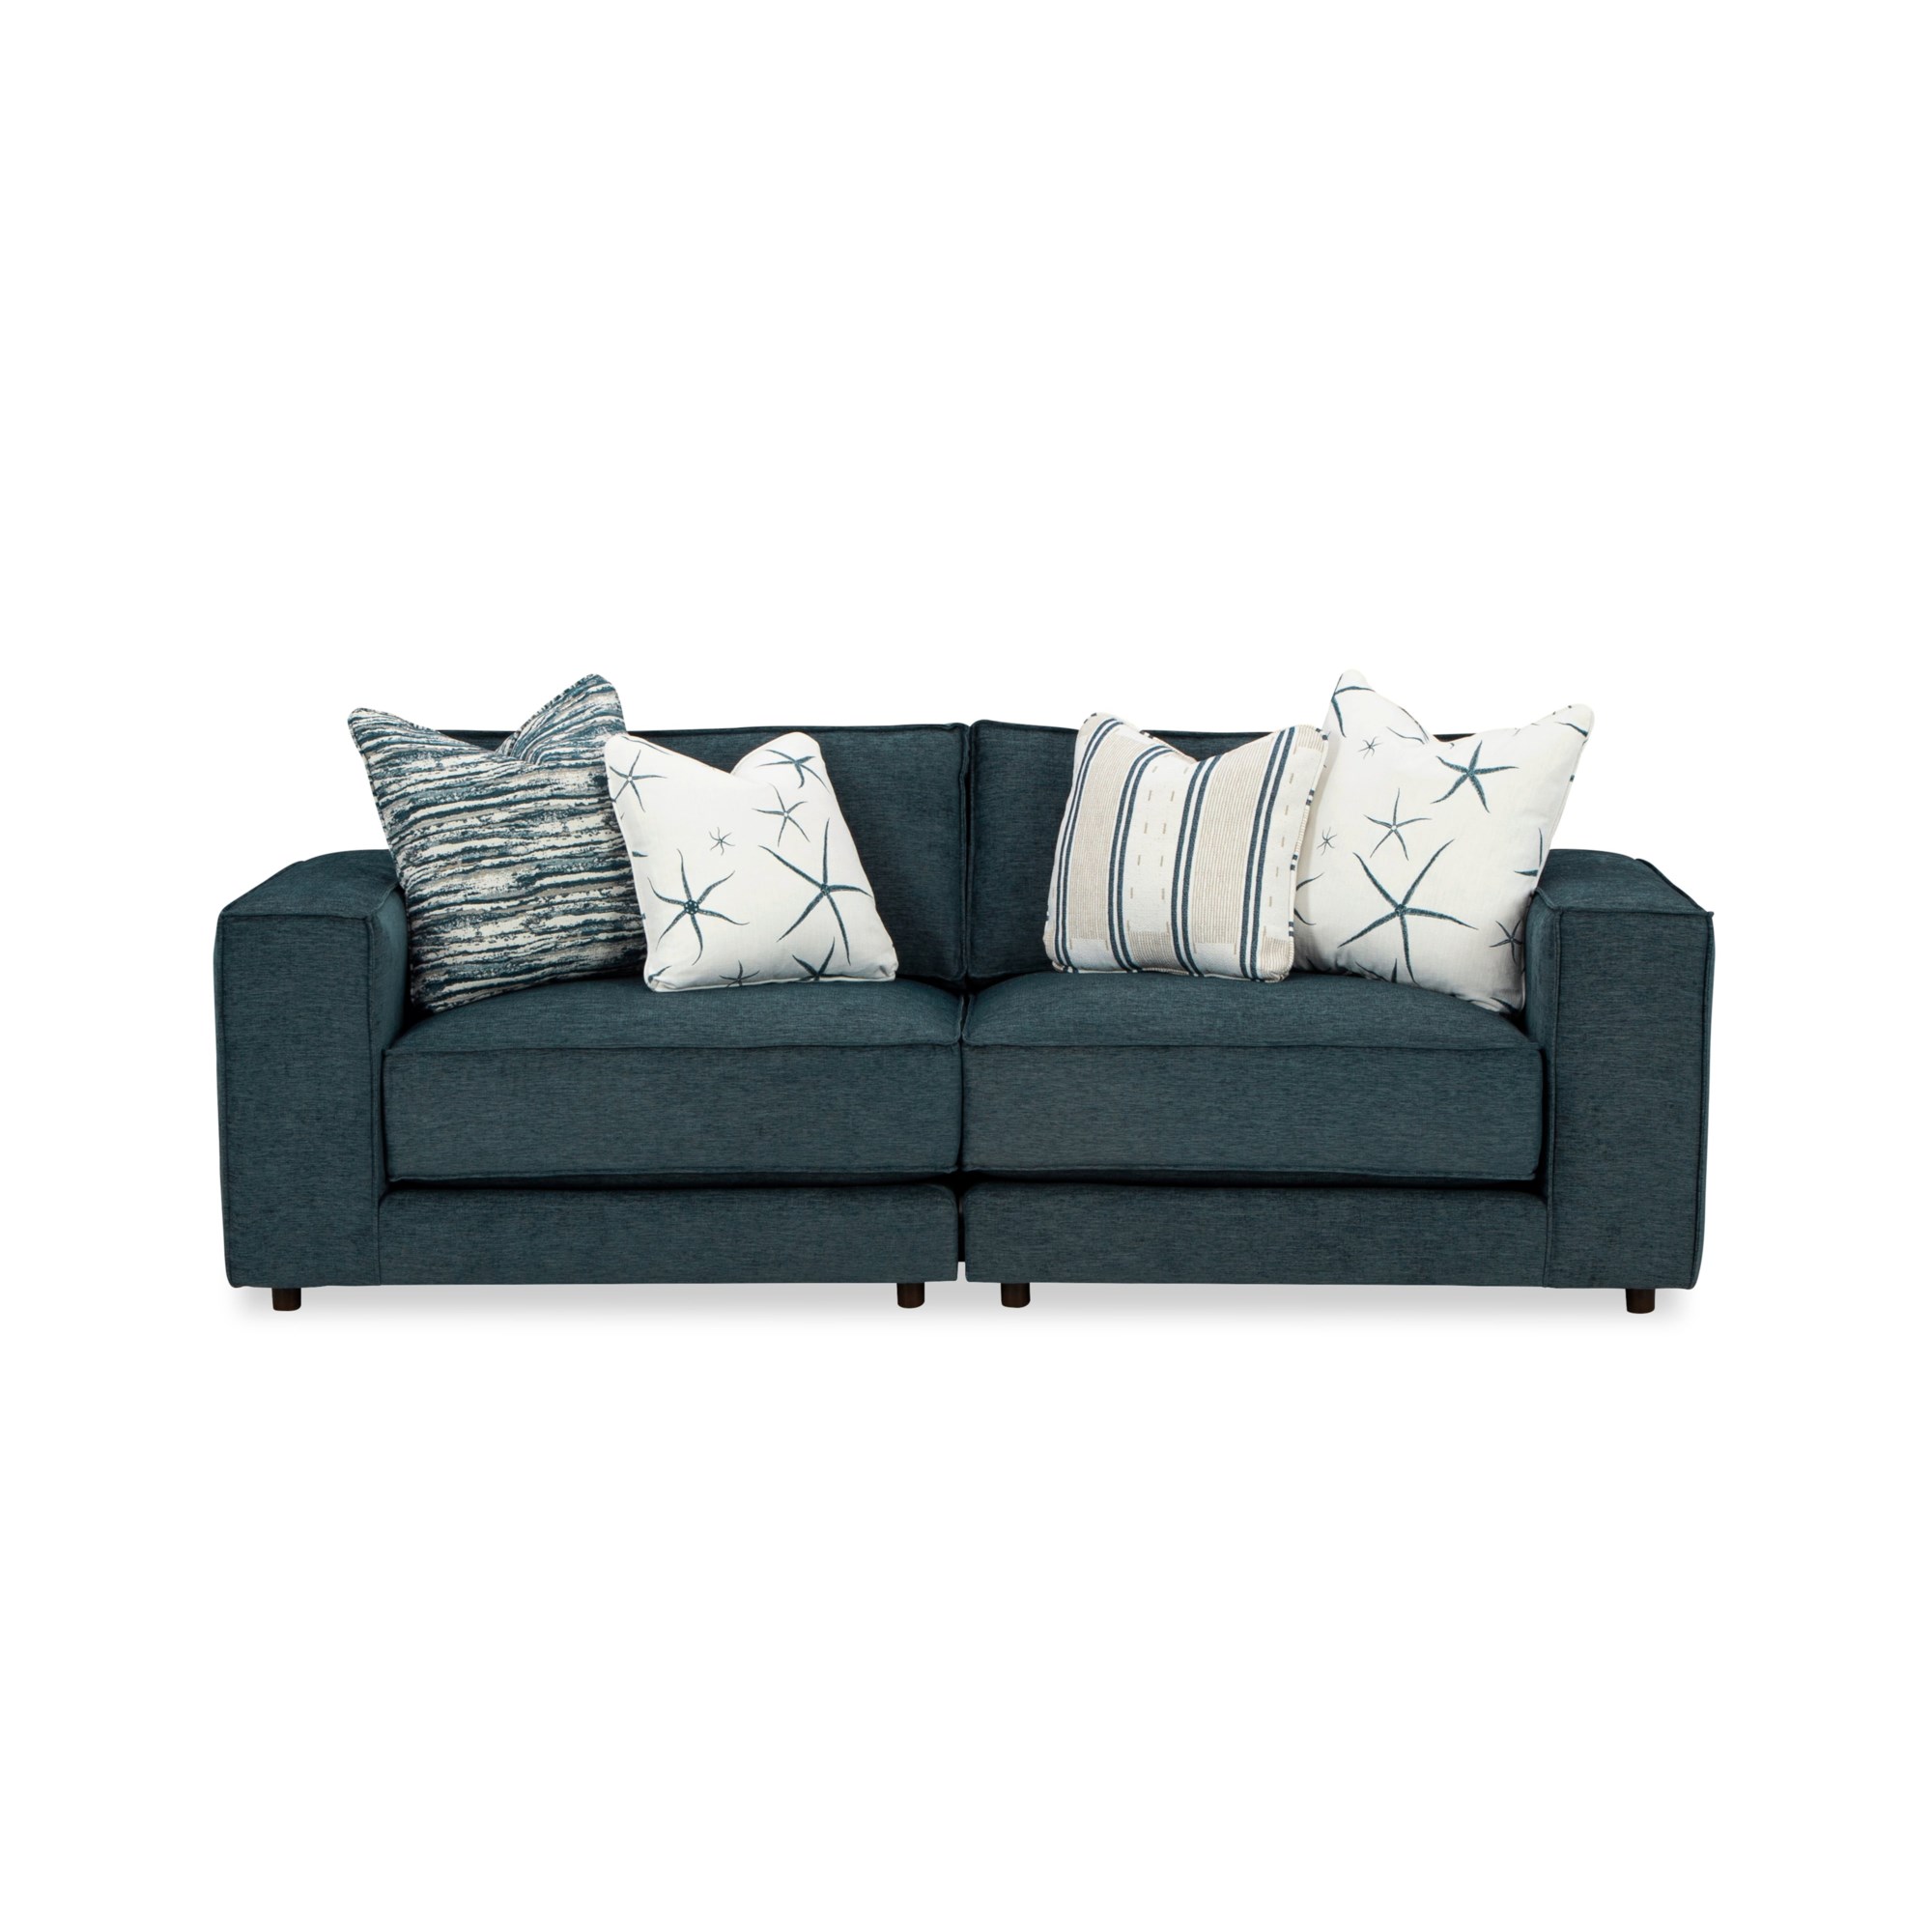 Sofa Collections ROBBIE-23 Sofas Uph 734819BDx1+734818BDx1 Furniture with 2 734801BD Modular Craftmaster Home | Seats - Stationary Contemporary |